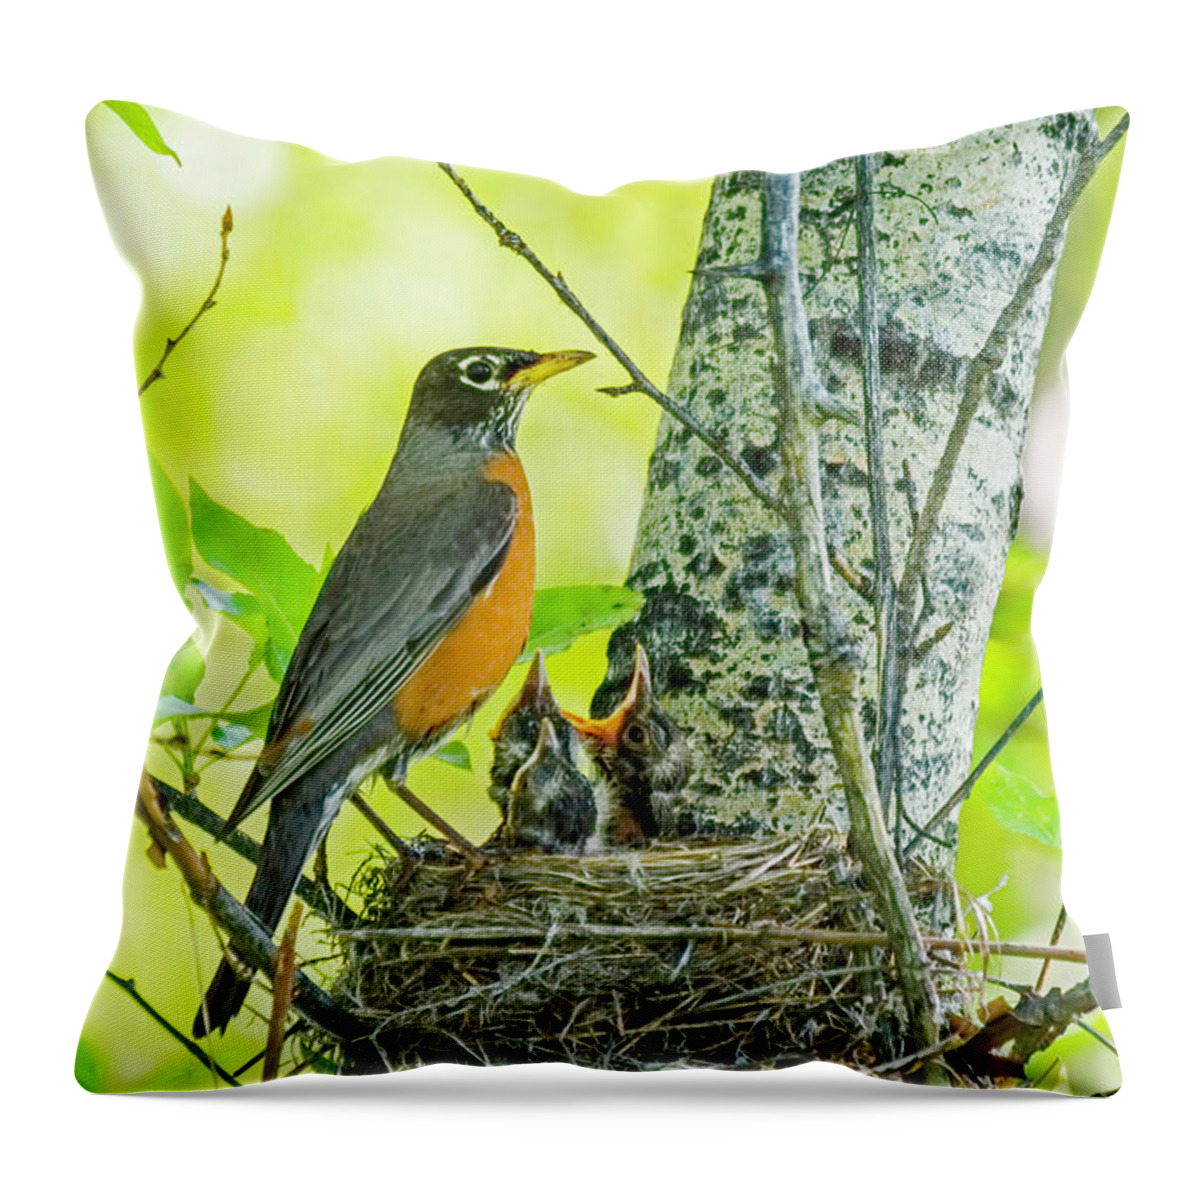 American Robin Throw Pillow featuring the photograph American Robin Feeding Chicks by Gary Beeler